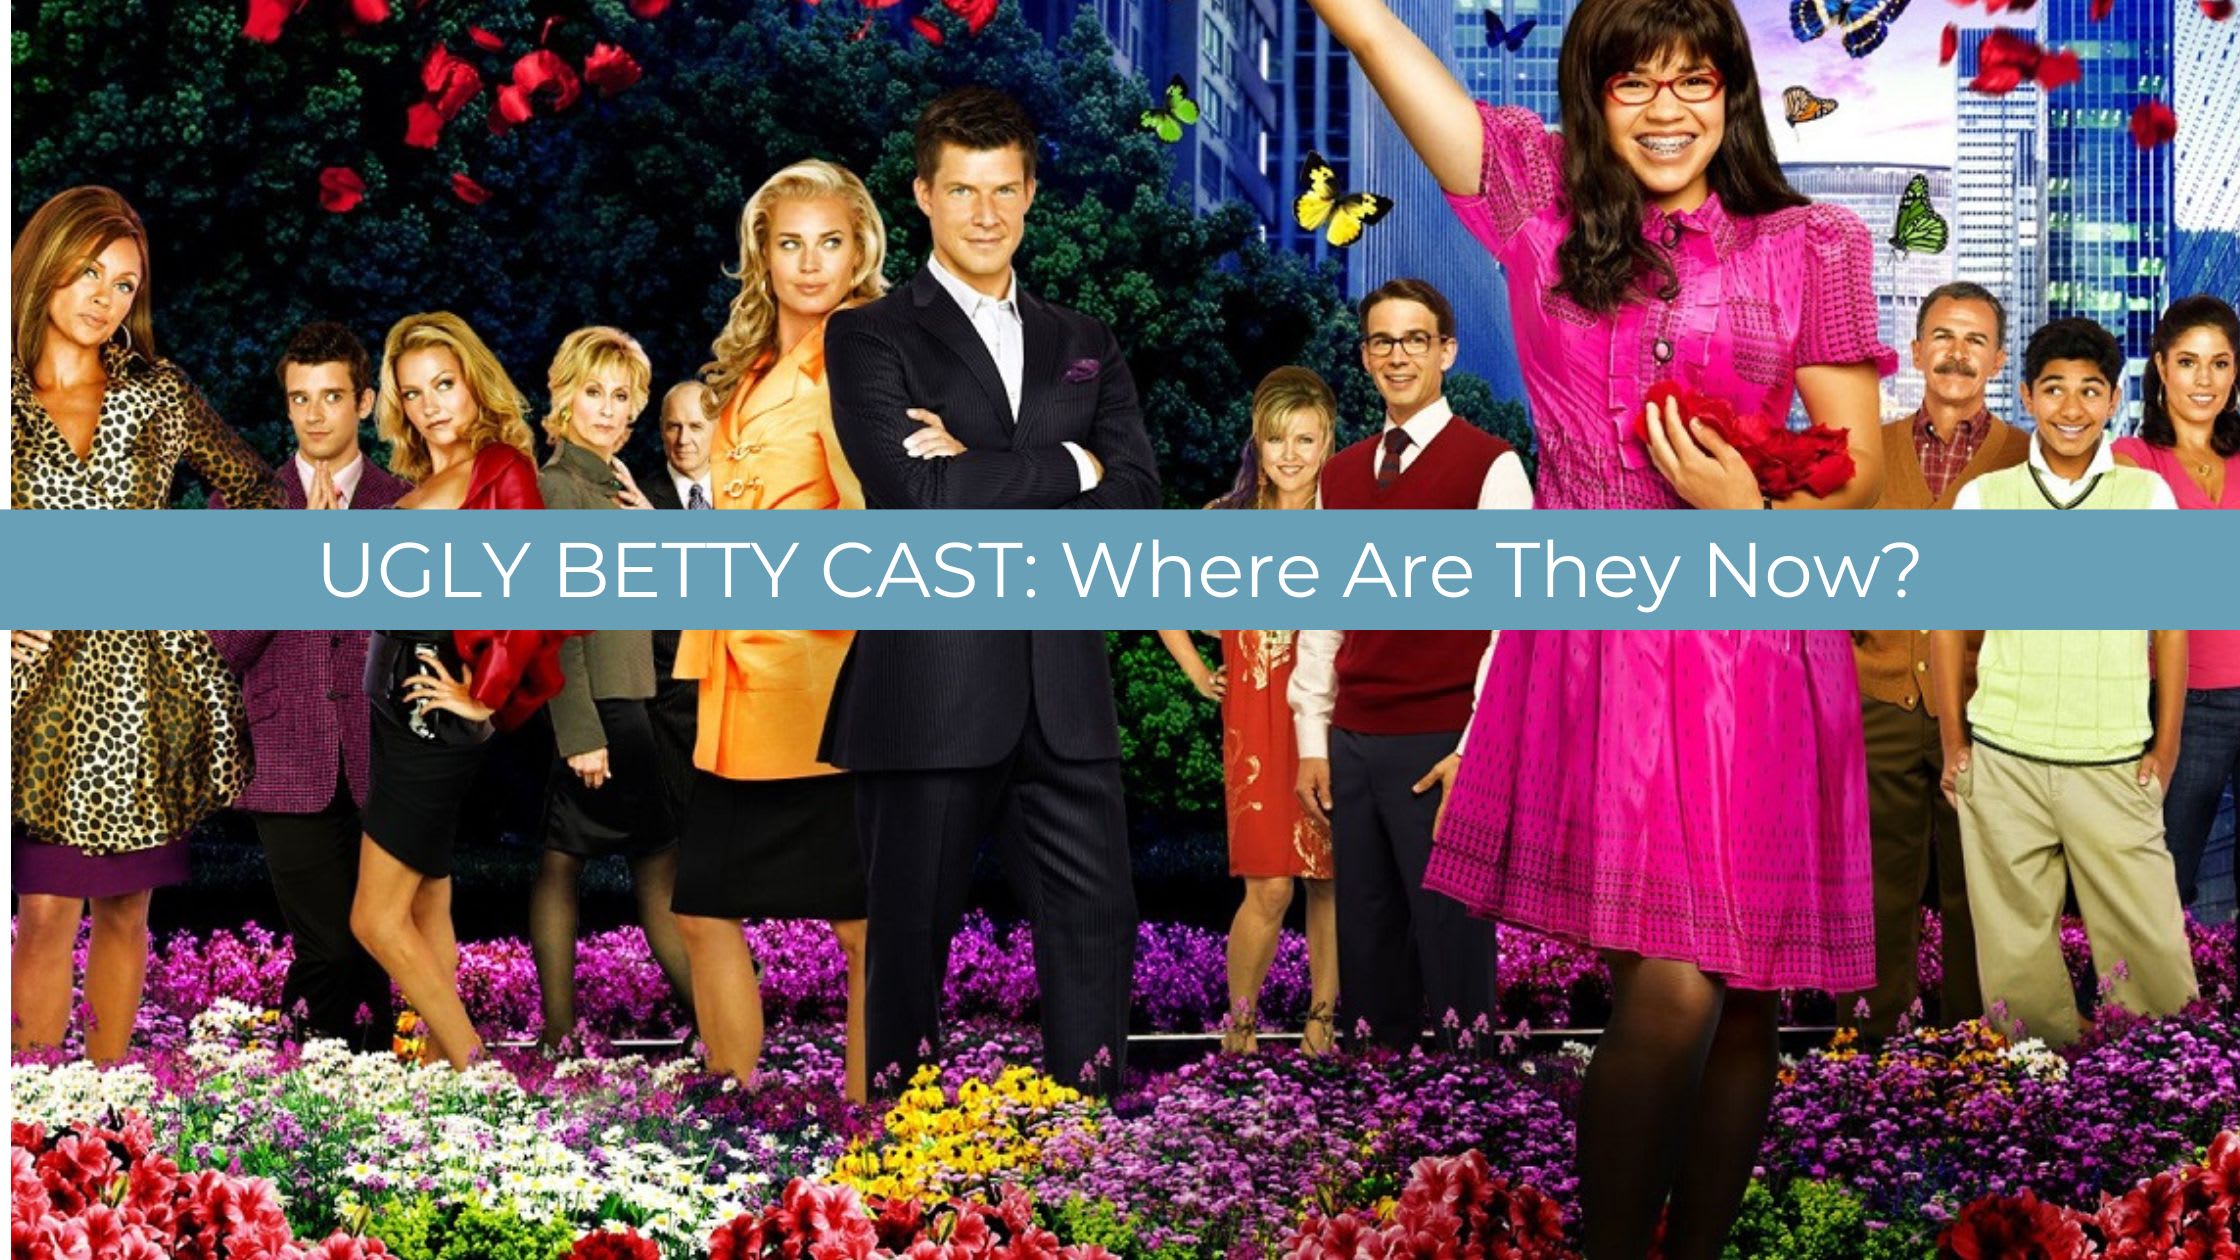 Ugly Betty Cast: Where Are They Now? - TV Fanatic